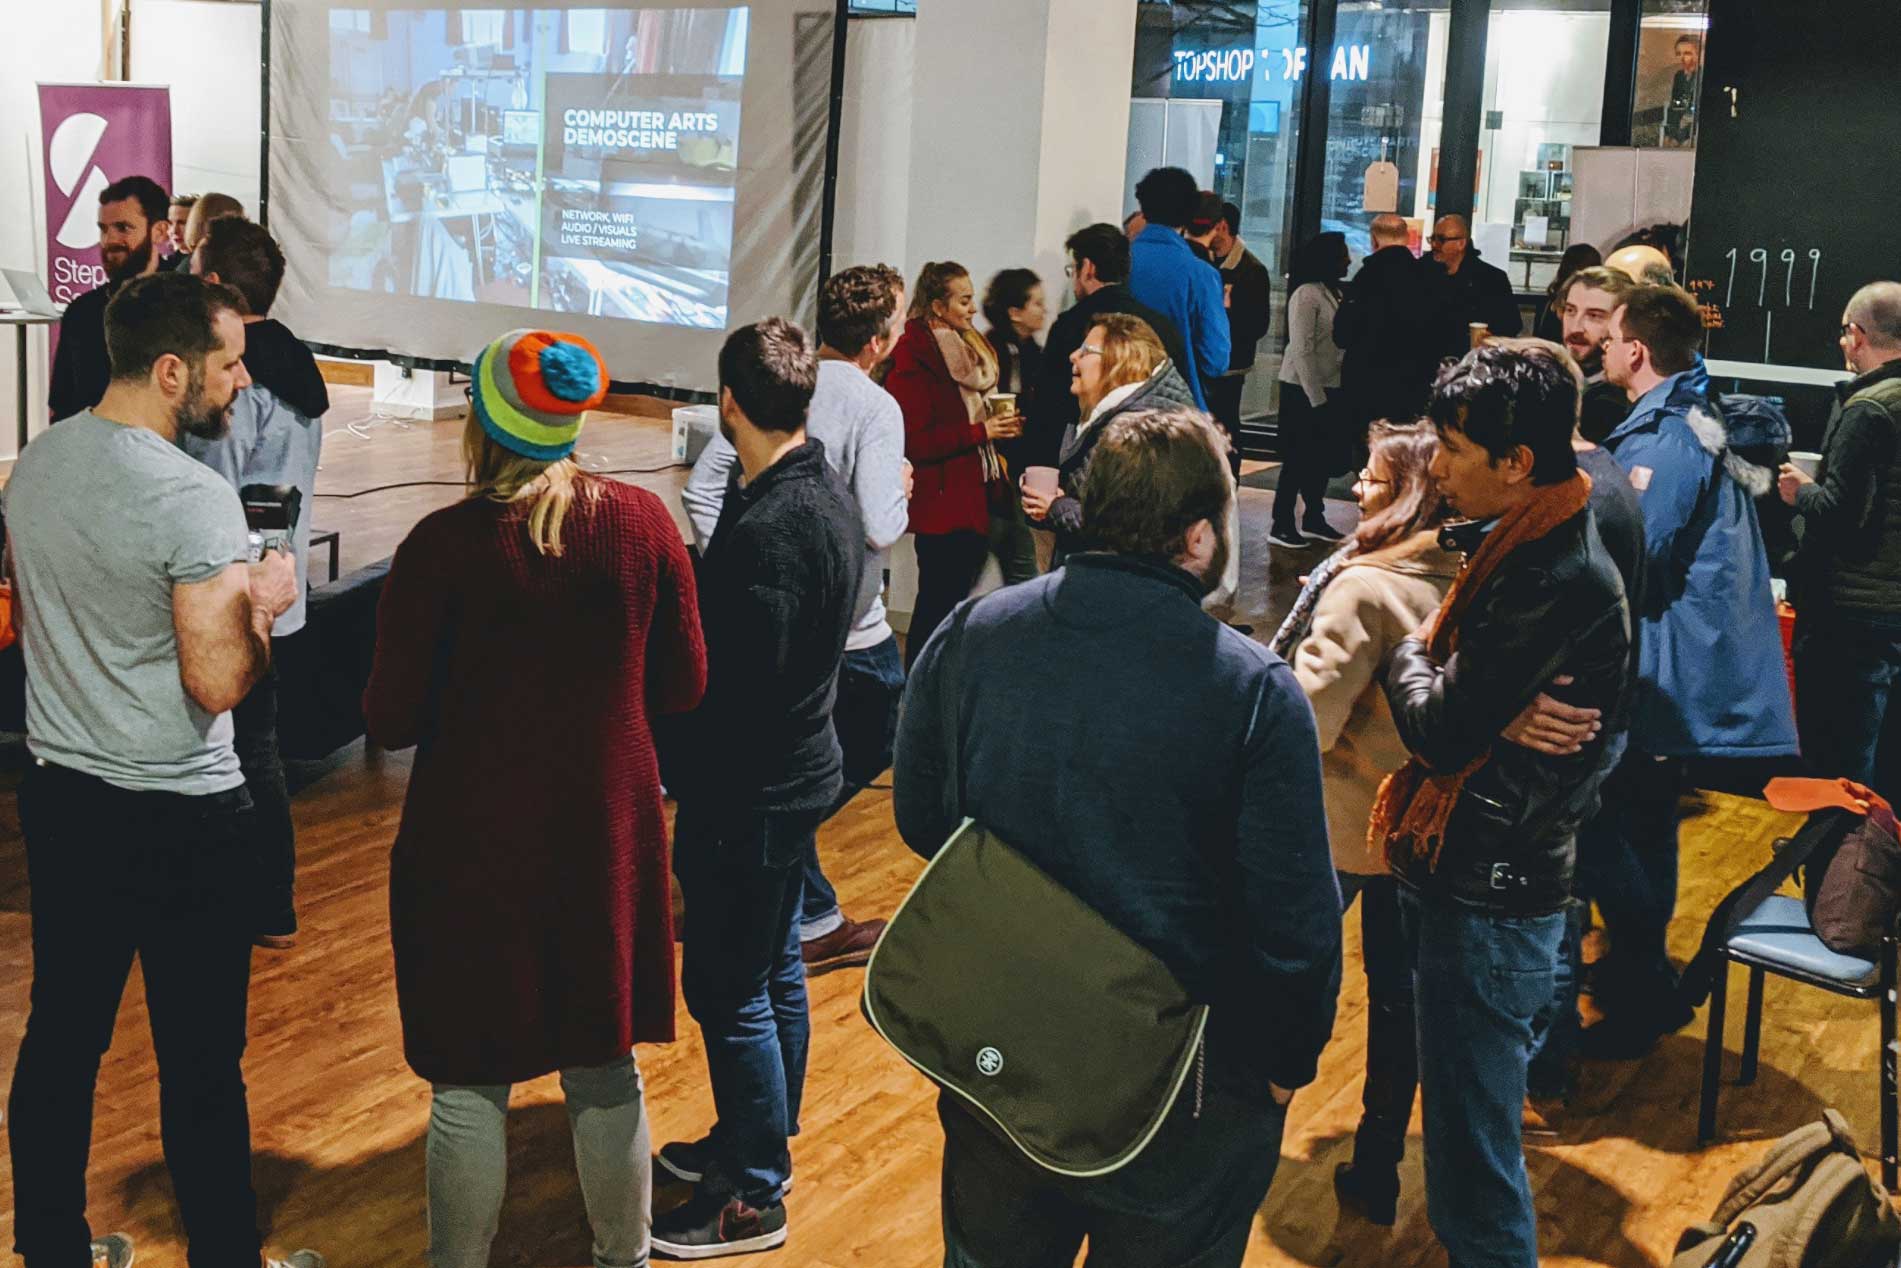 Photo of a group of people mingling with a projector screen in the background